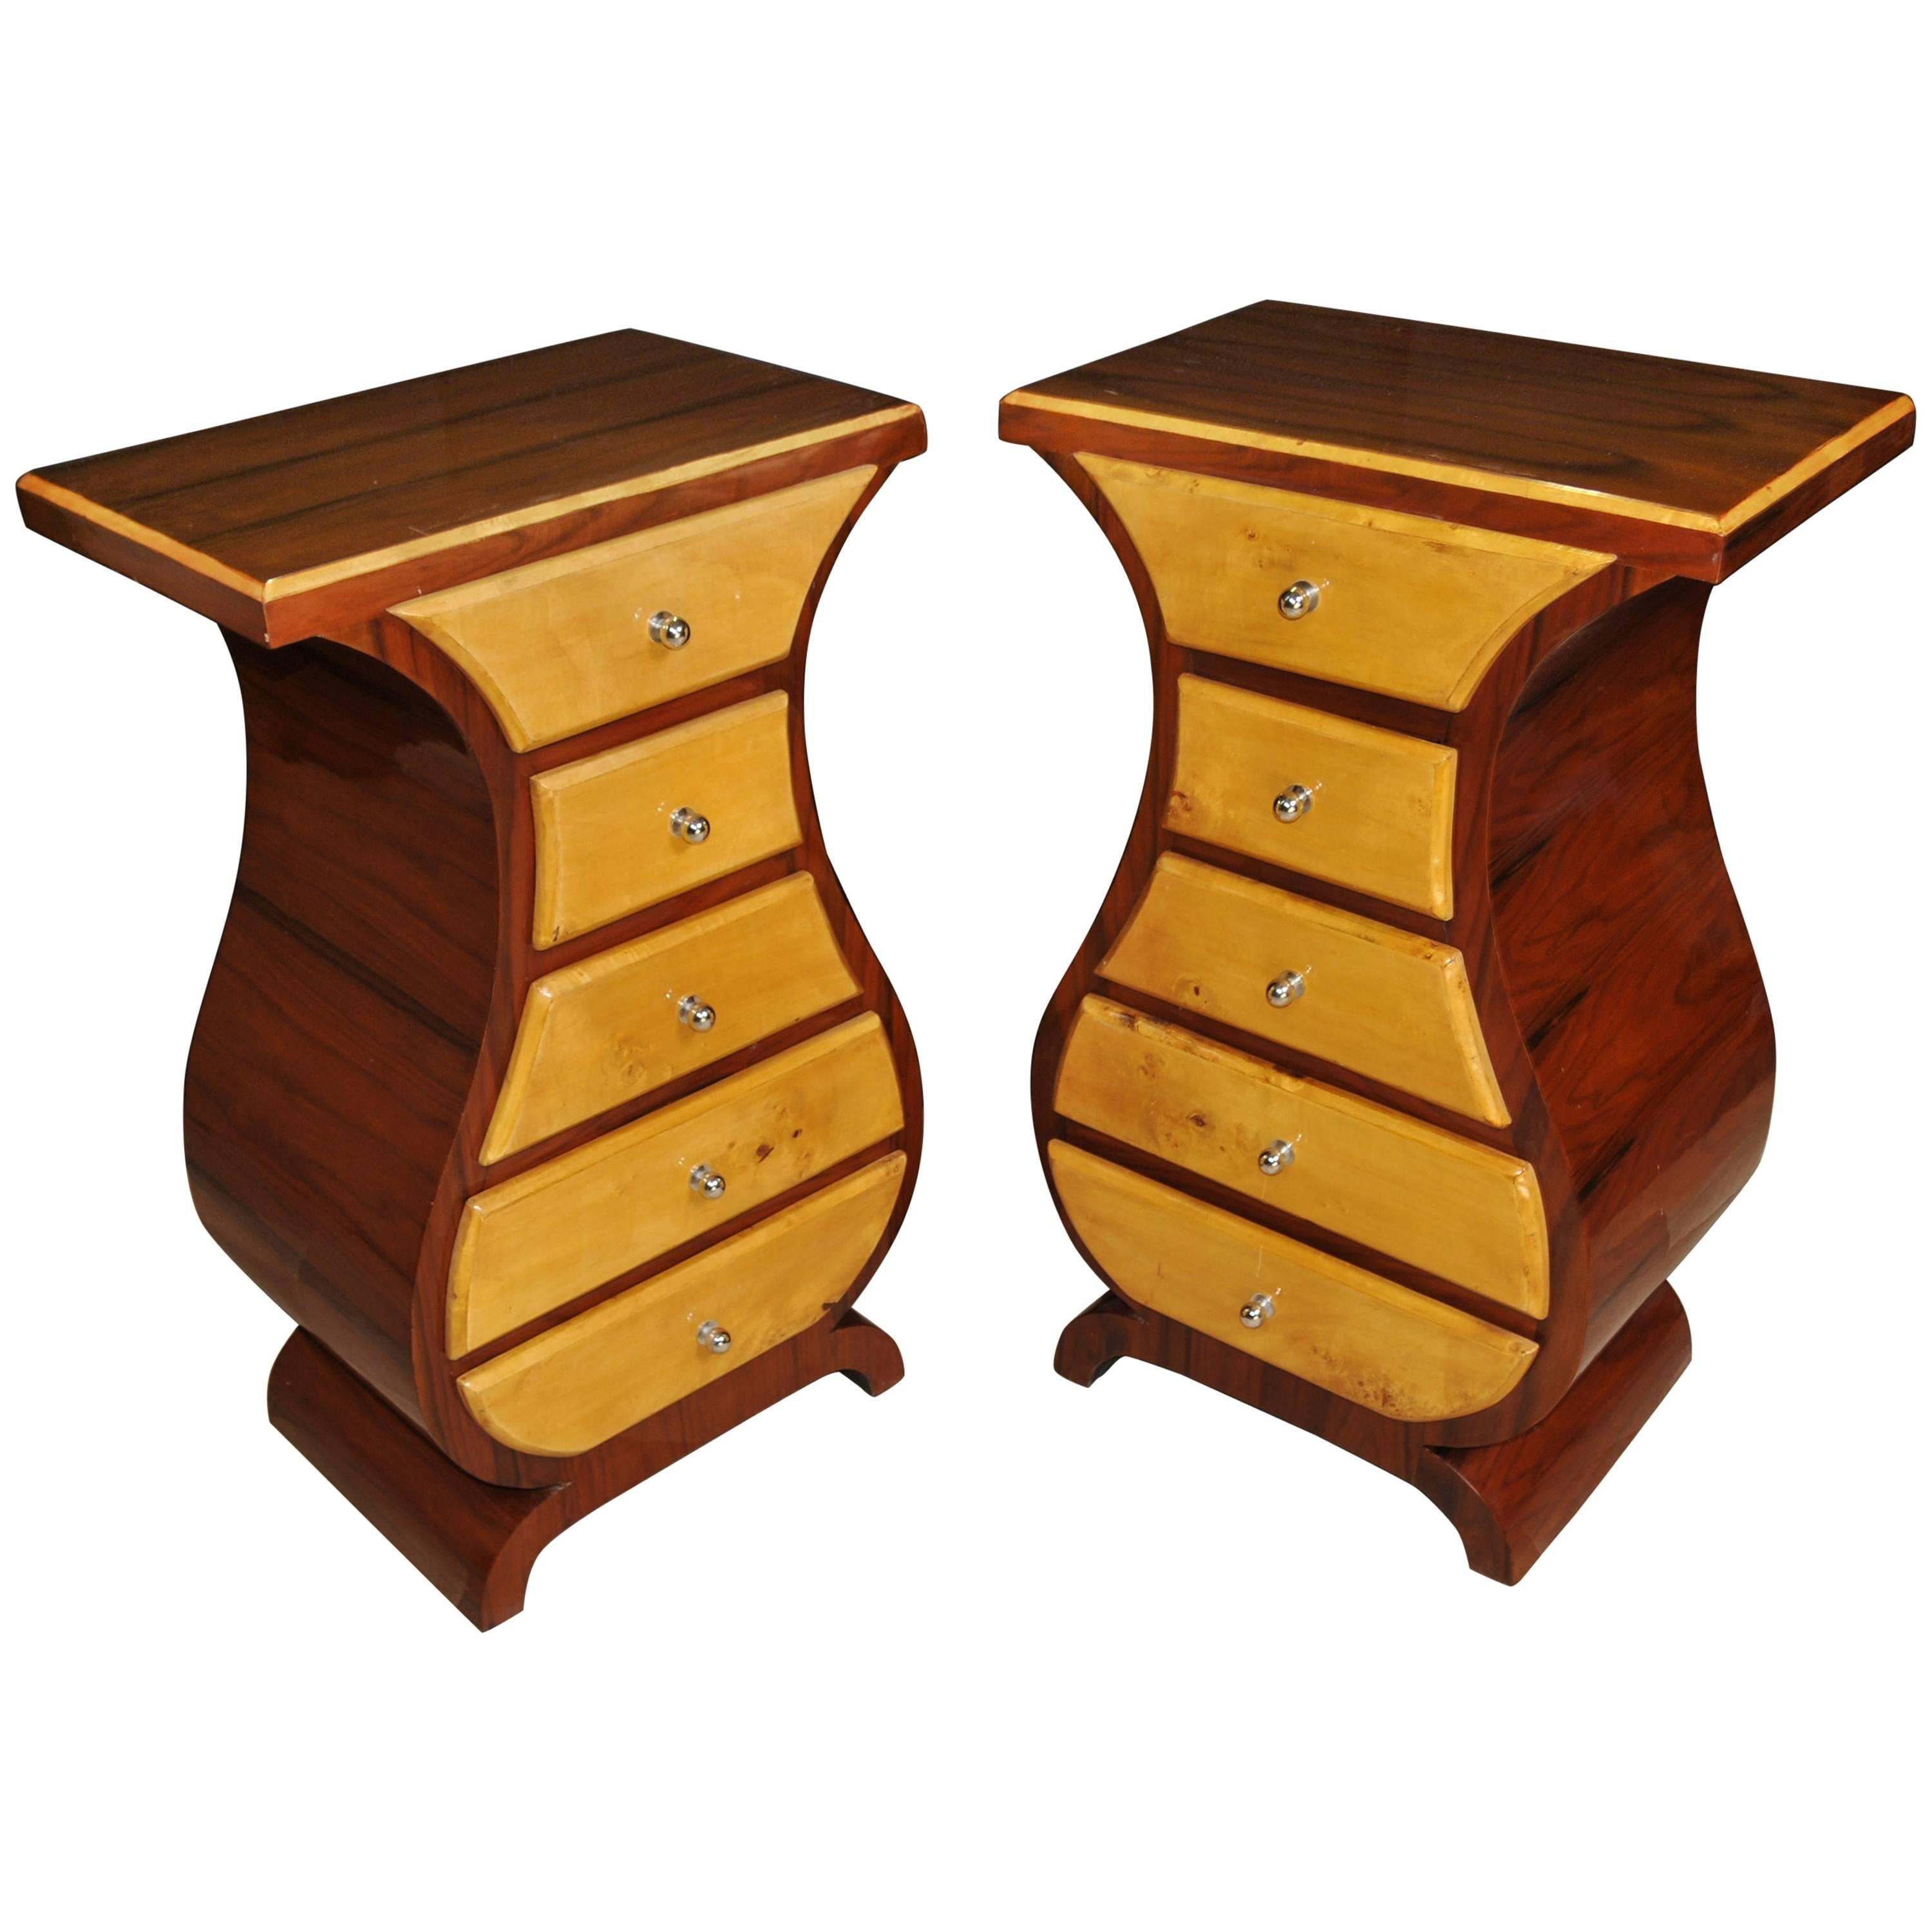 Pair of Art Deco Style Bedside Chests/ Nightstands Modernist Furniture For Sale